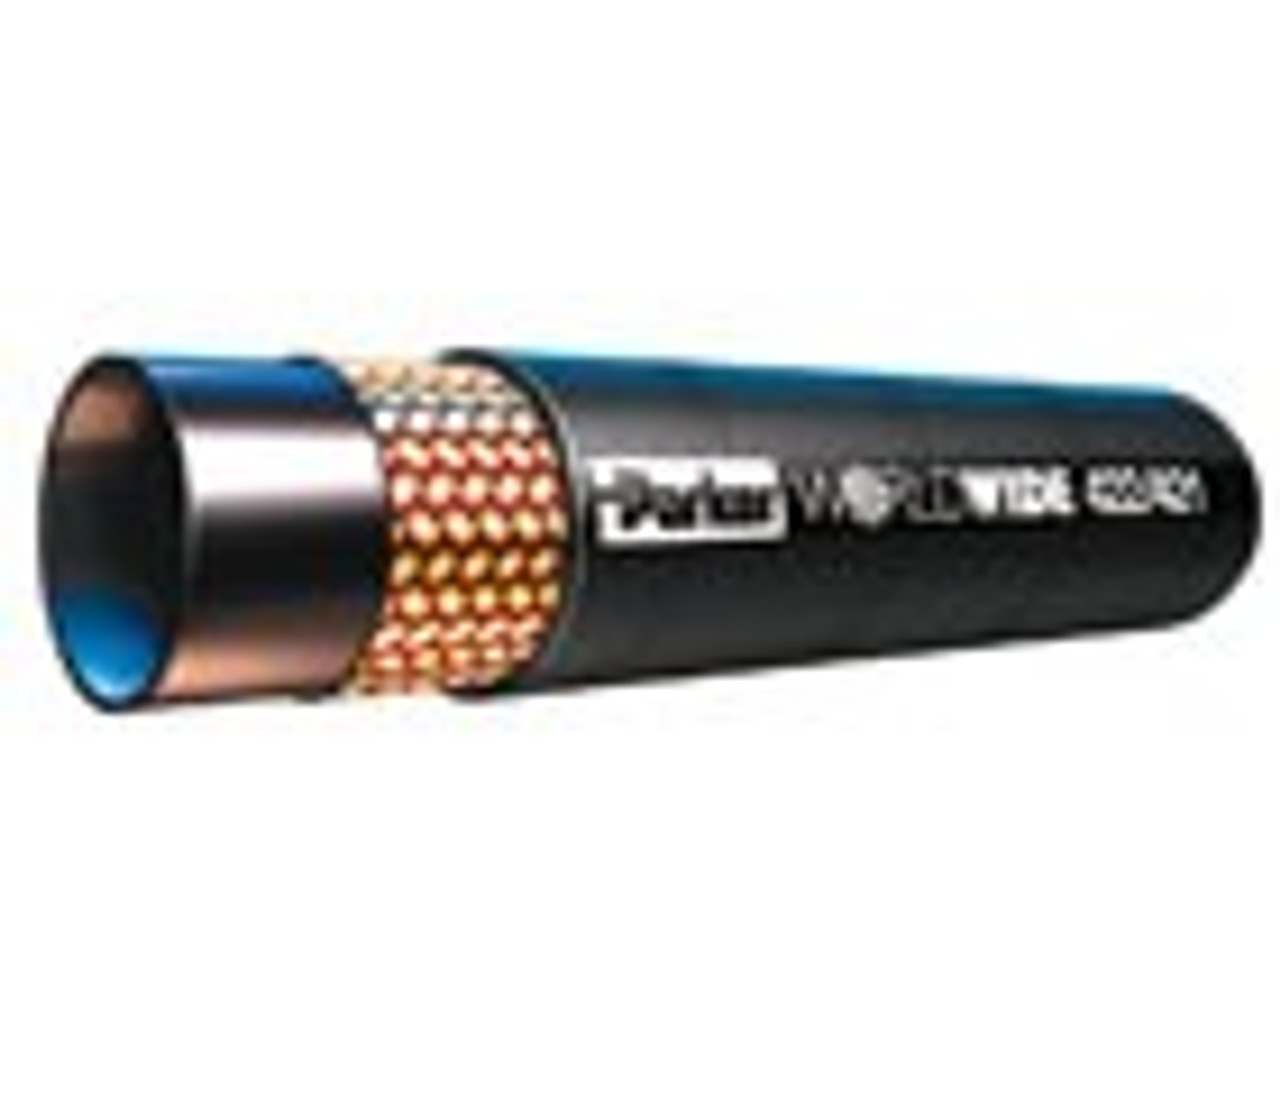 Parker 422-32 2" Id Worldwide Hydraulic Hose Black Synthetic Rubber Cover With Black Layline 575Psi (40Bar) 1 Wire Braid Temp Range Degrees F: (-40/+212) Sae 100R1At Iso 1436-1-1Sn